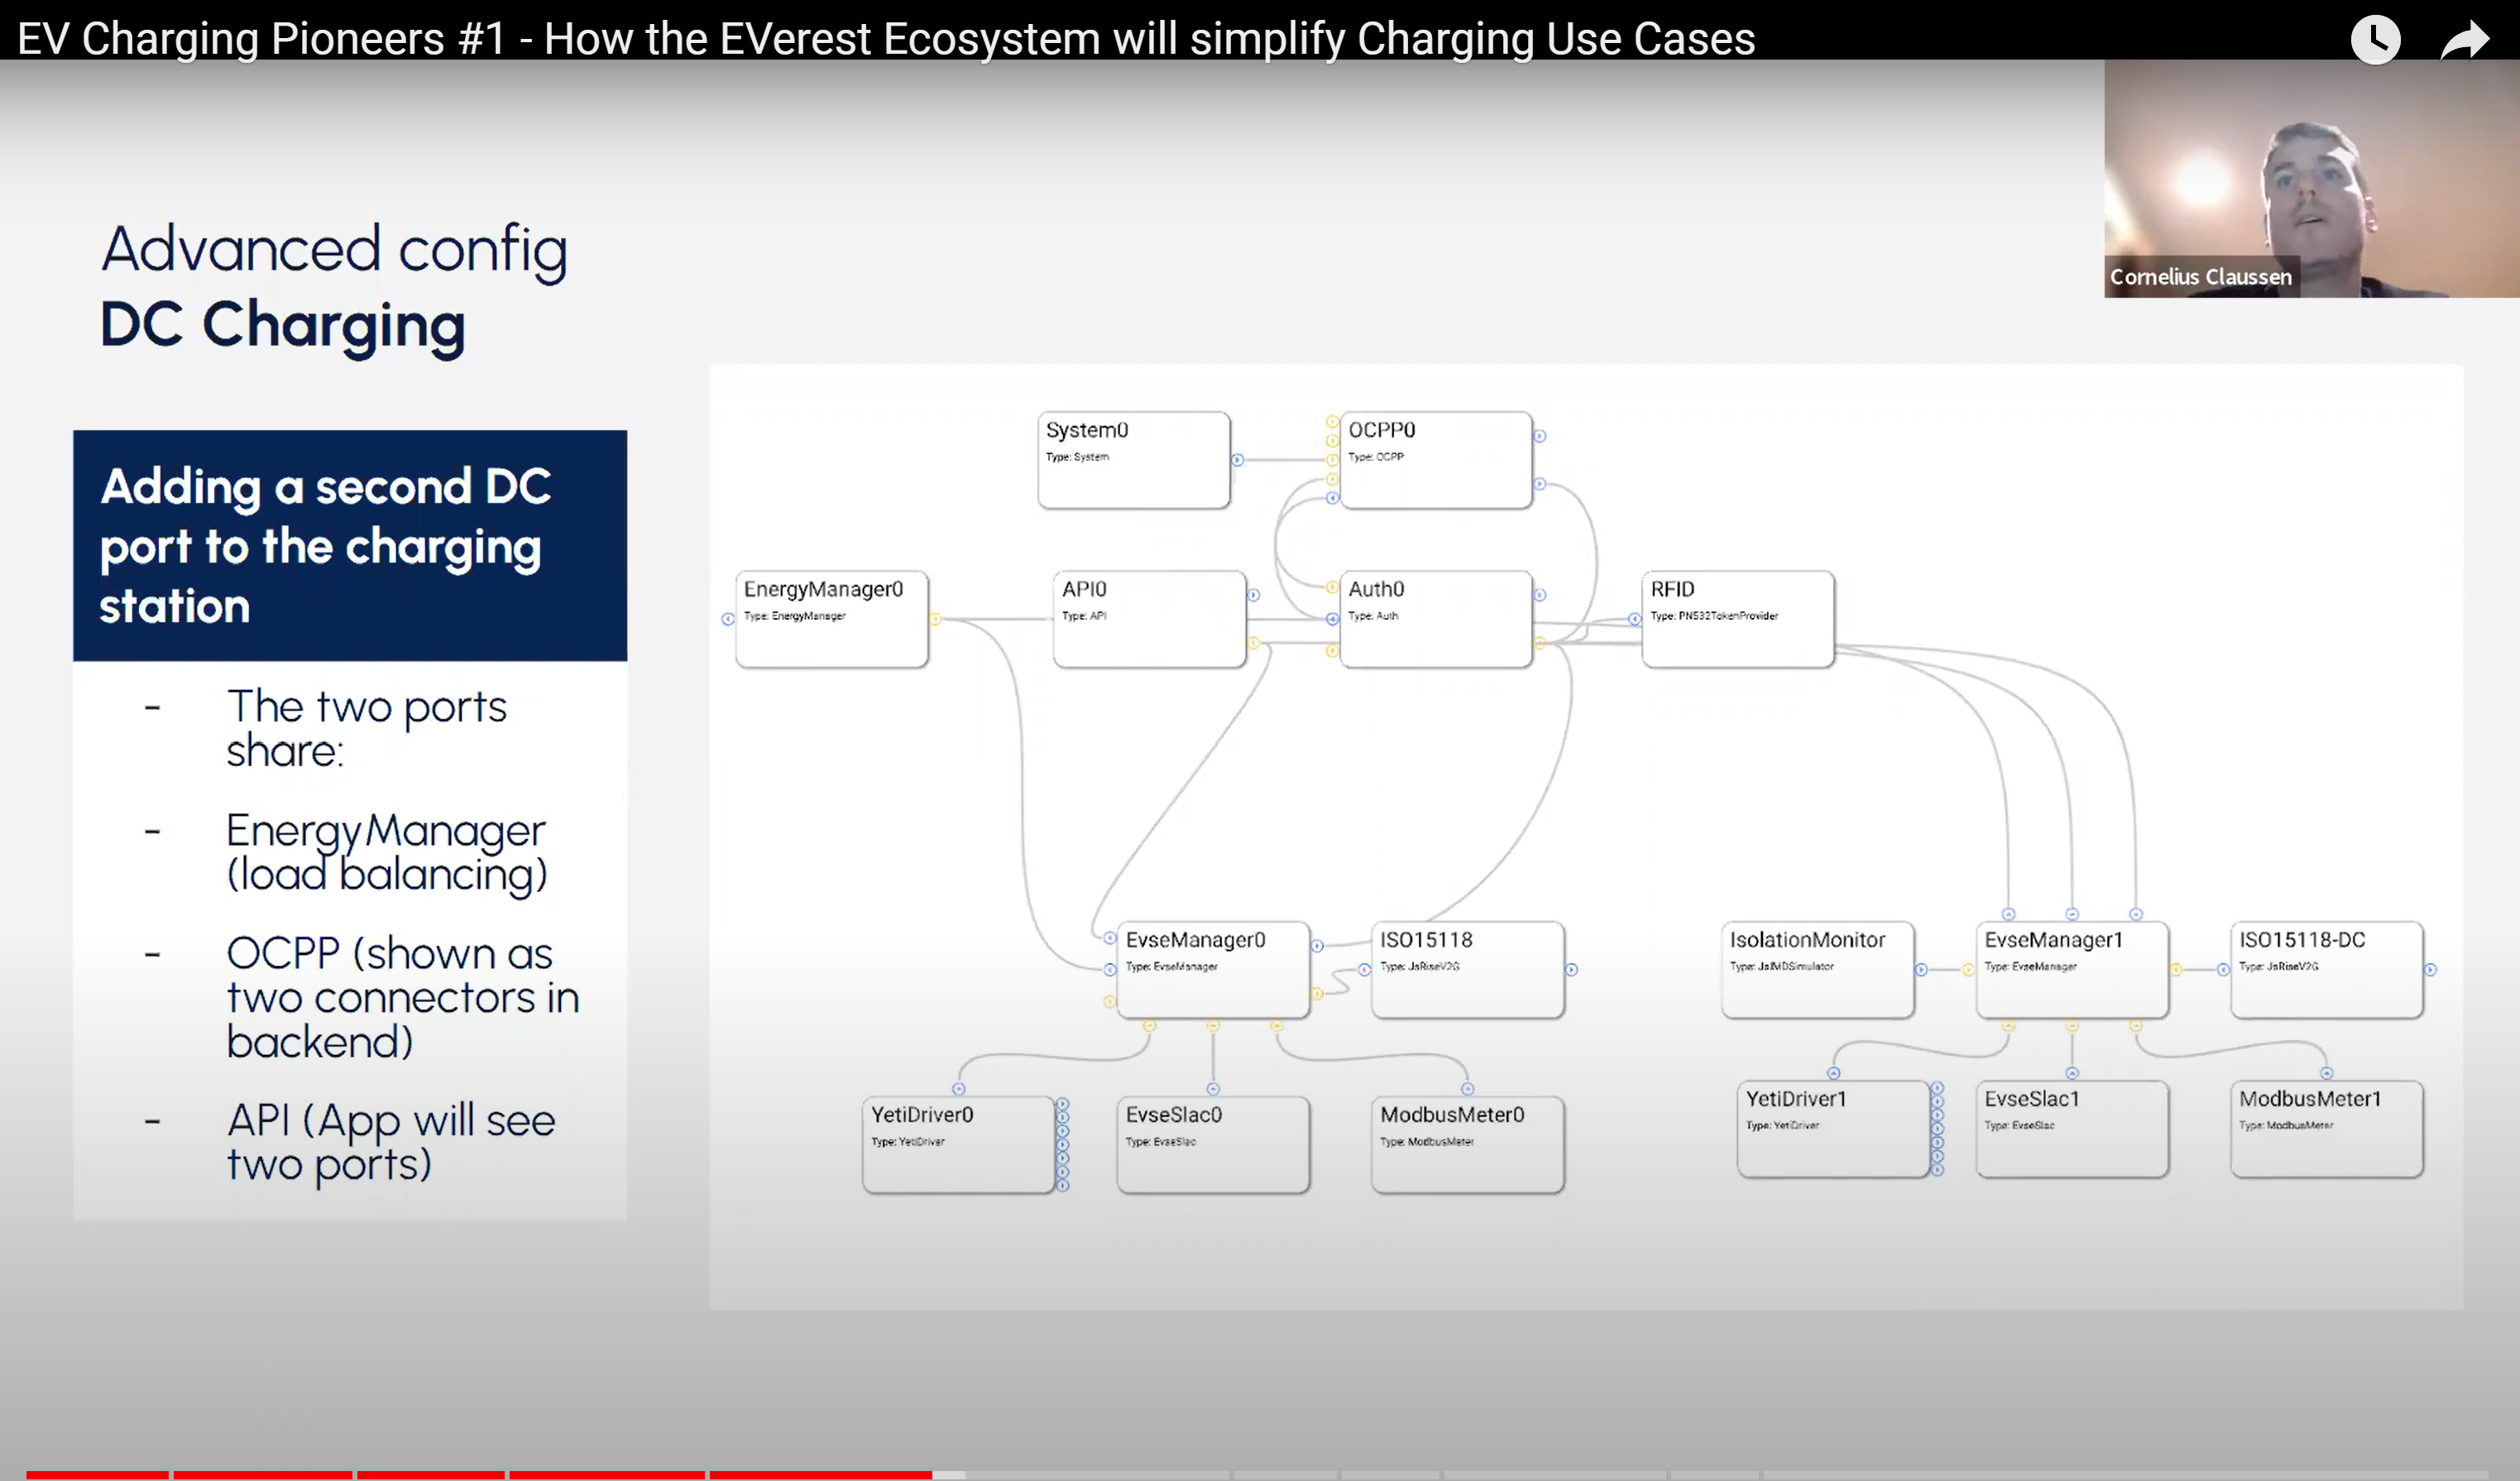 Screenshot of the webinar video How EVerest Ecosystem simplifies Charging Use Cases